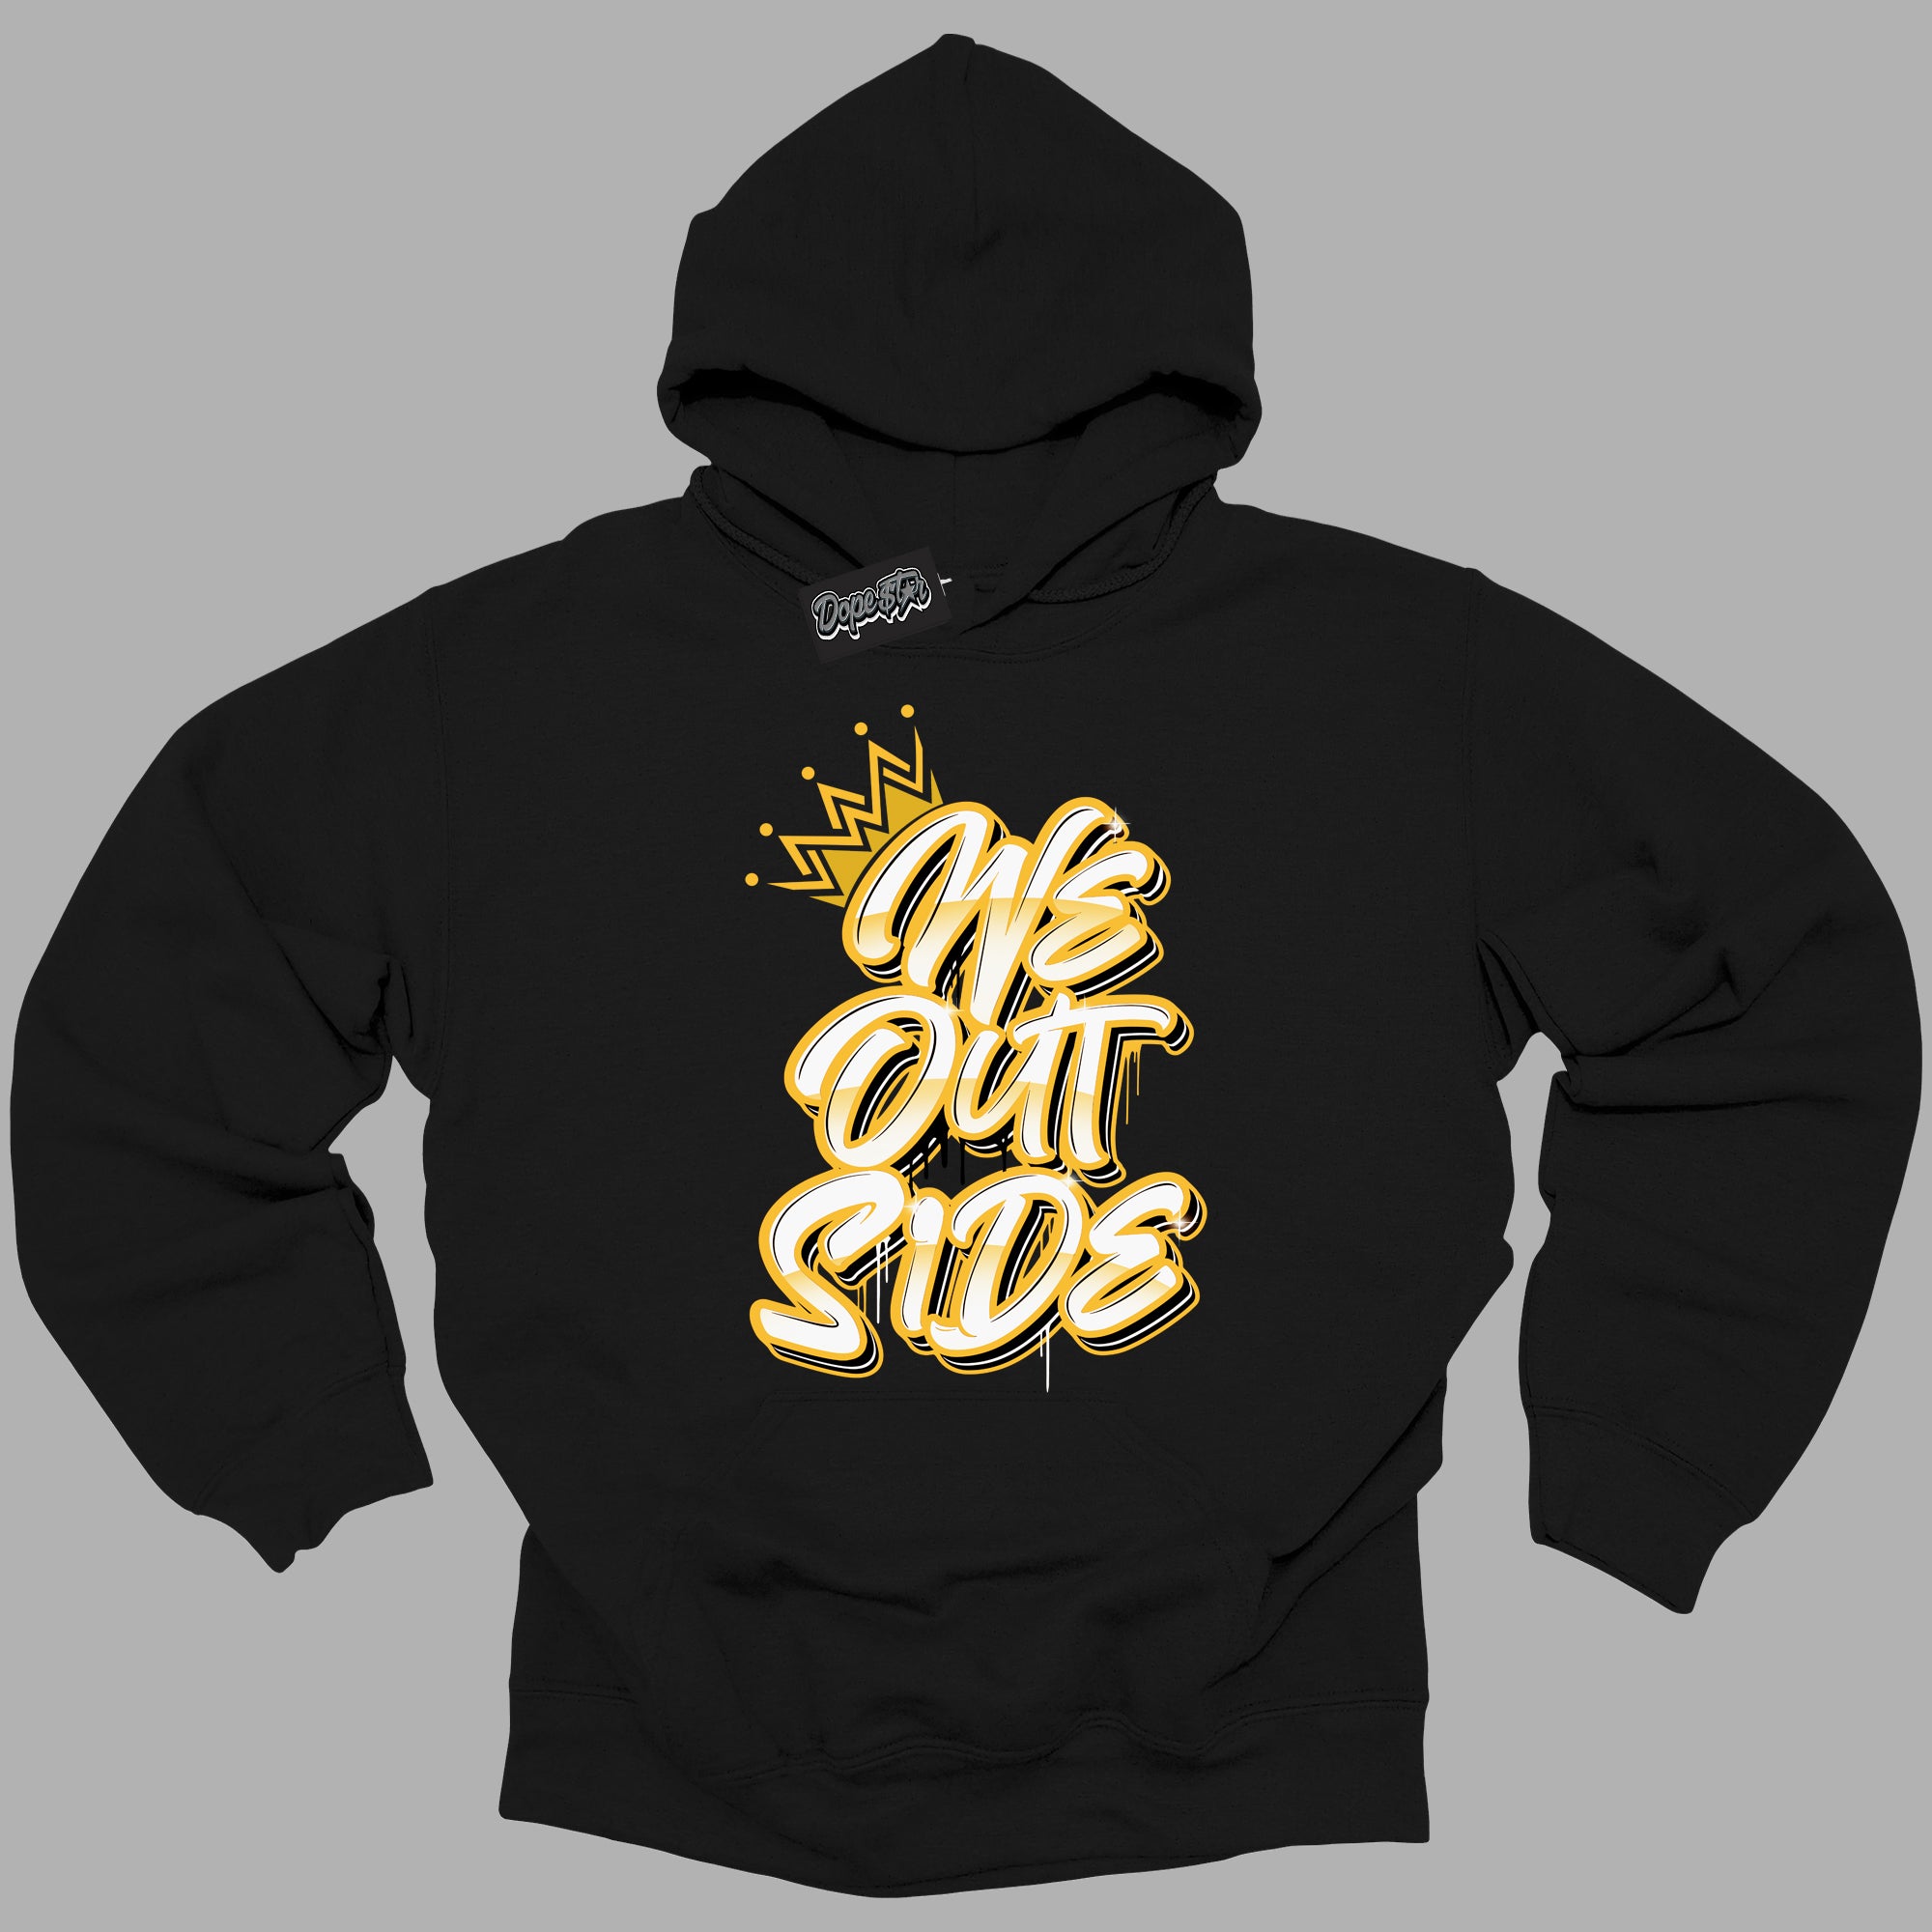 Cool Black Hoodie with “We Outside ”  design that Perfectly Matches Yellow Ochre 6s Sneakers.